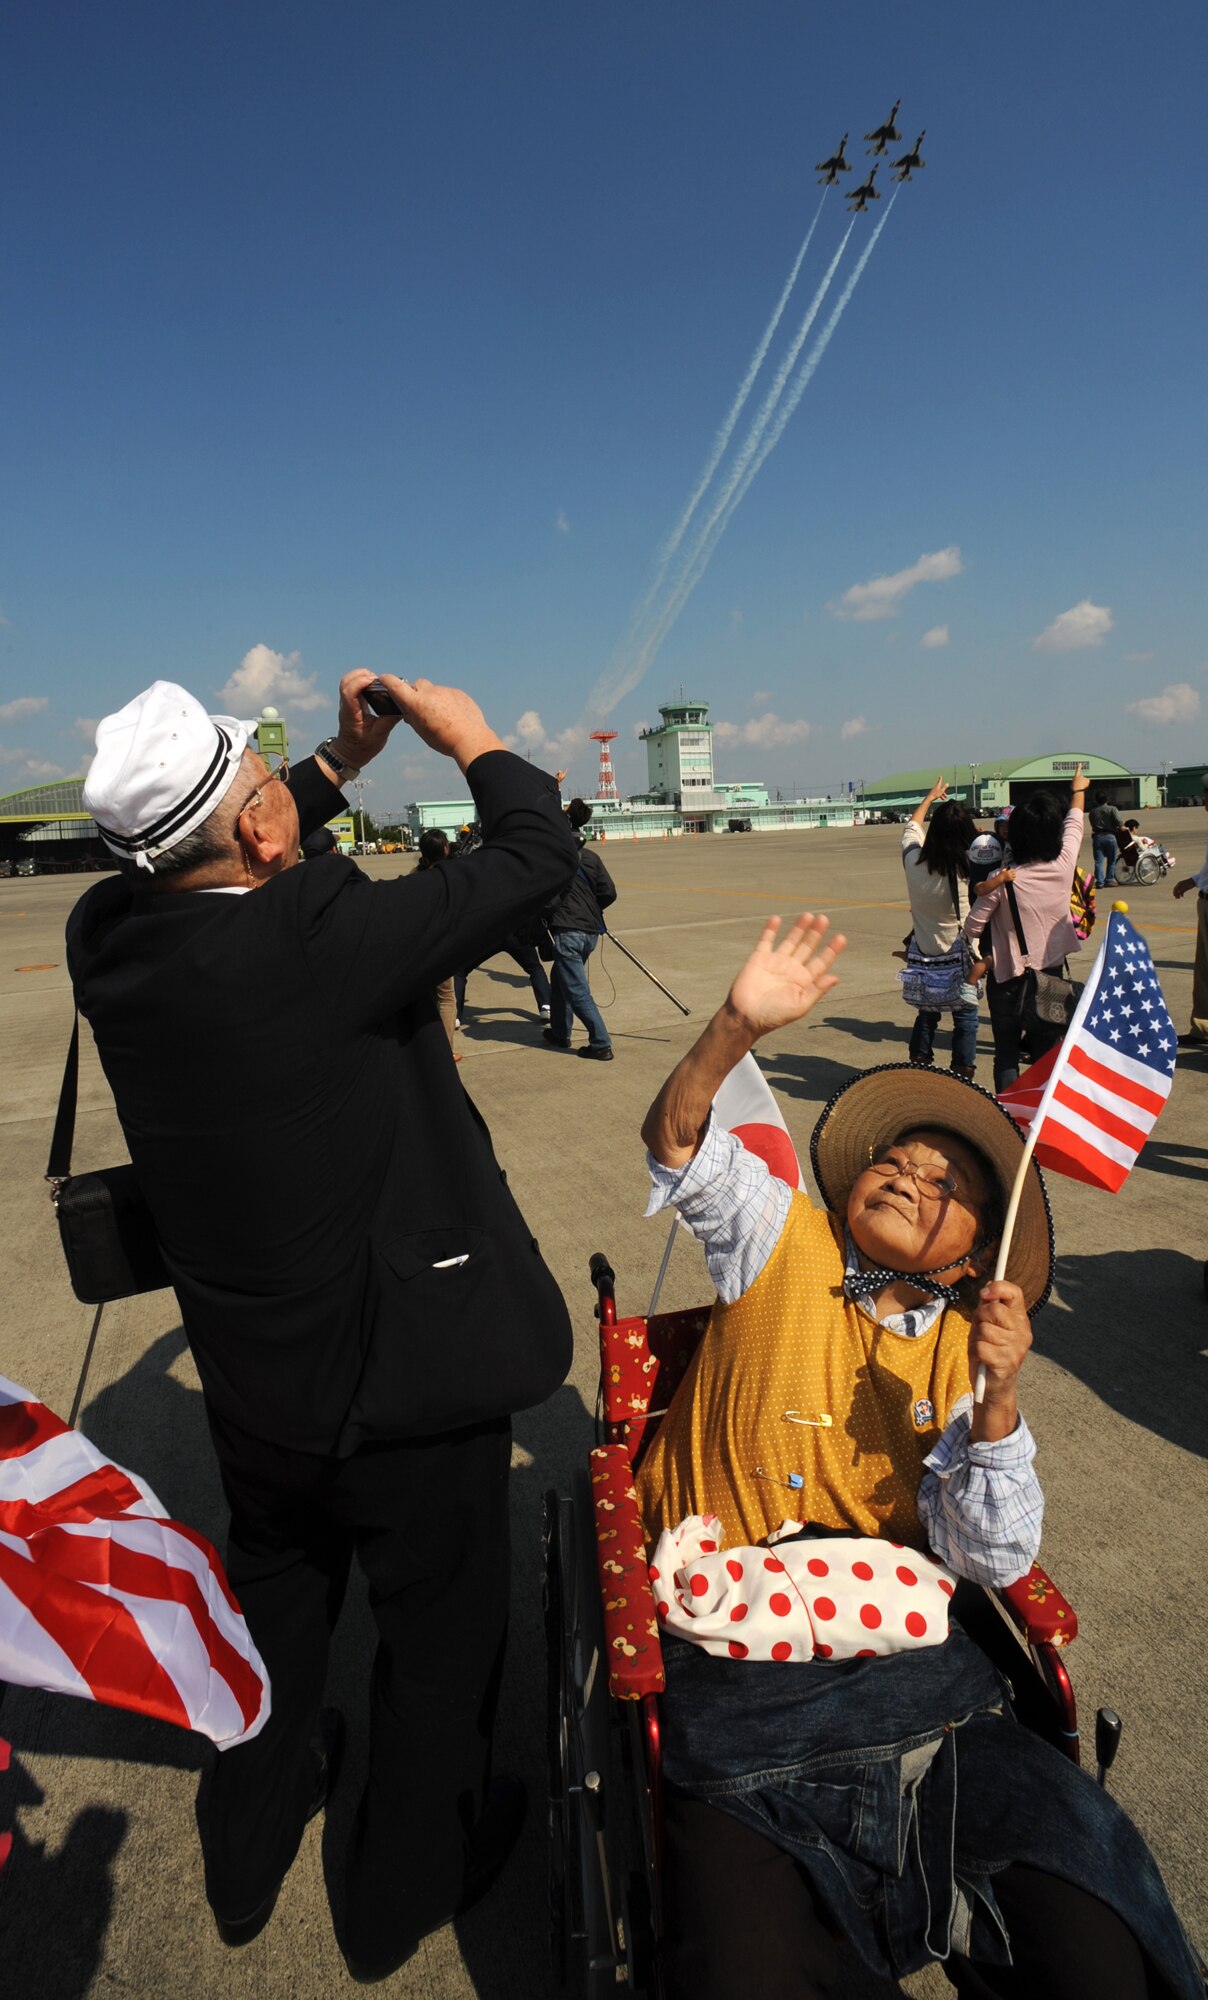 Citizens of Hamamatsu, Japan enjoy the day as the U.S. Air Force Thunderbirds practice overhead, Oct. 16, in preparation for the upcoming air show.  (U.S. Air Force photo by Staff Sgt. Kristi Machado)